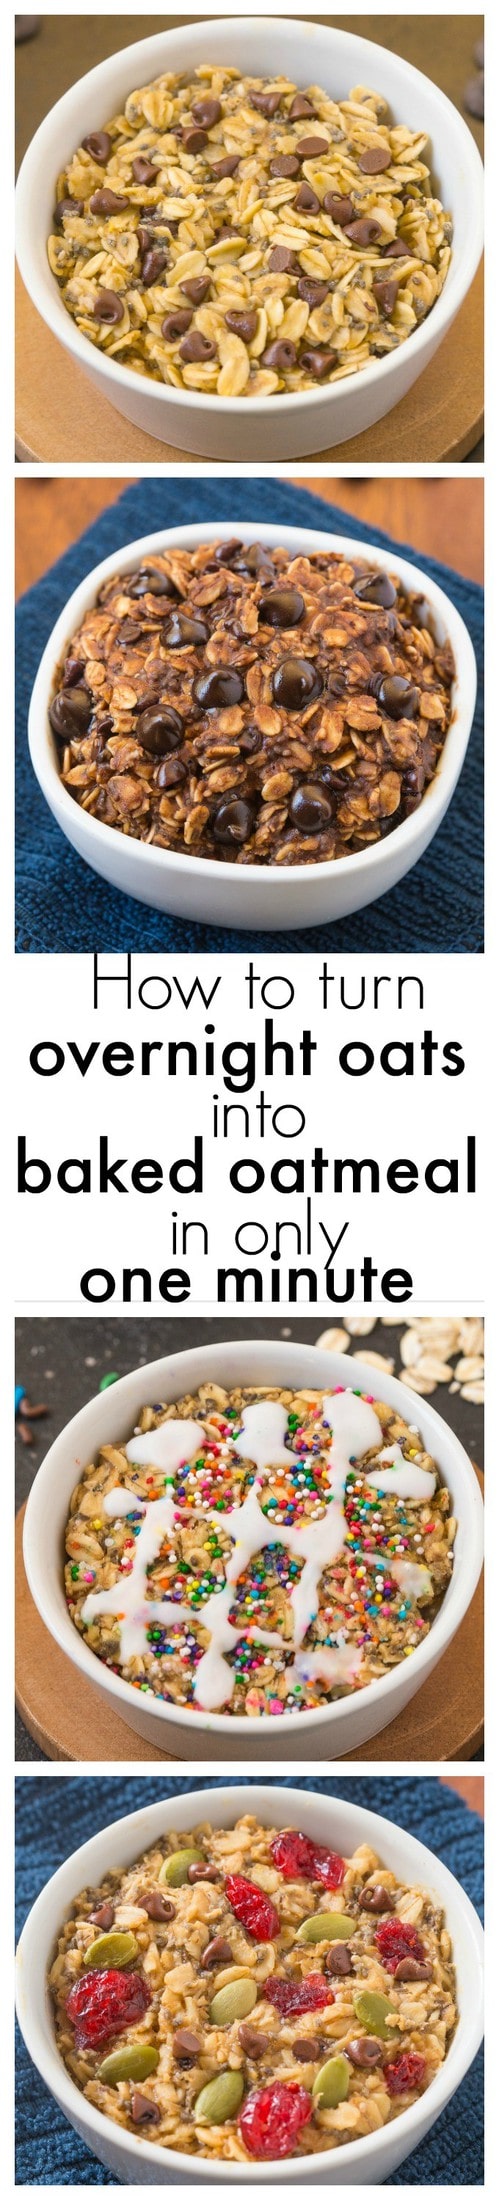 How to turn overnight oats into baked oatmeal in just ONE minute! 